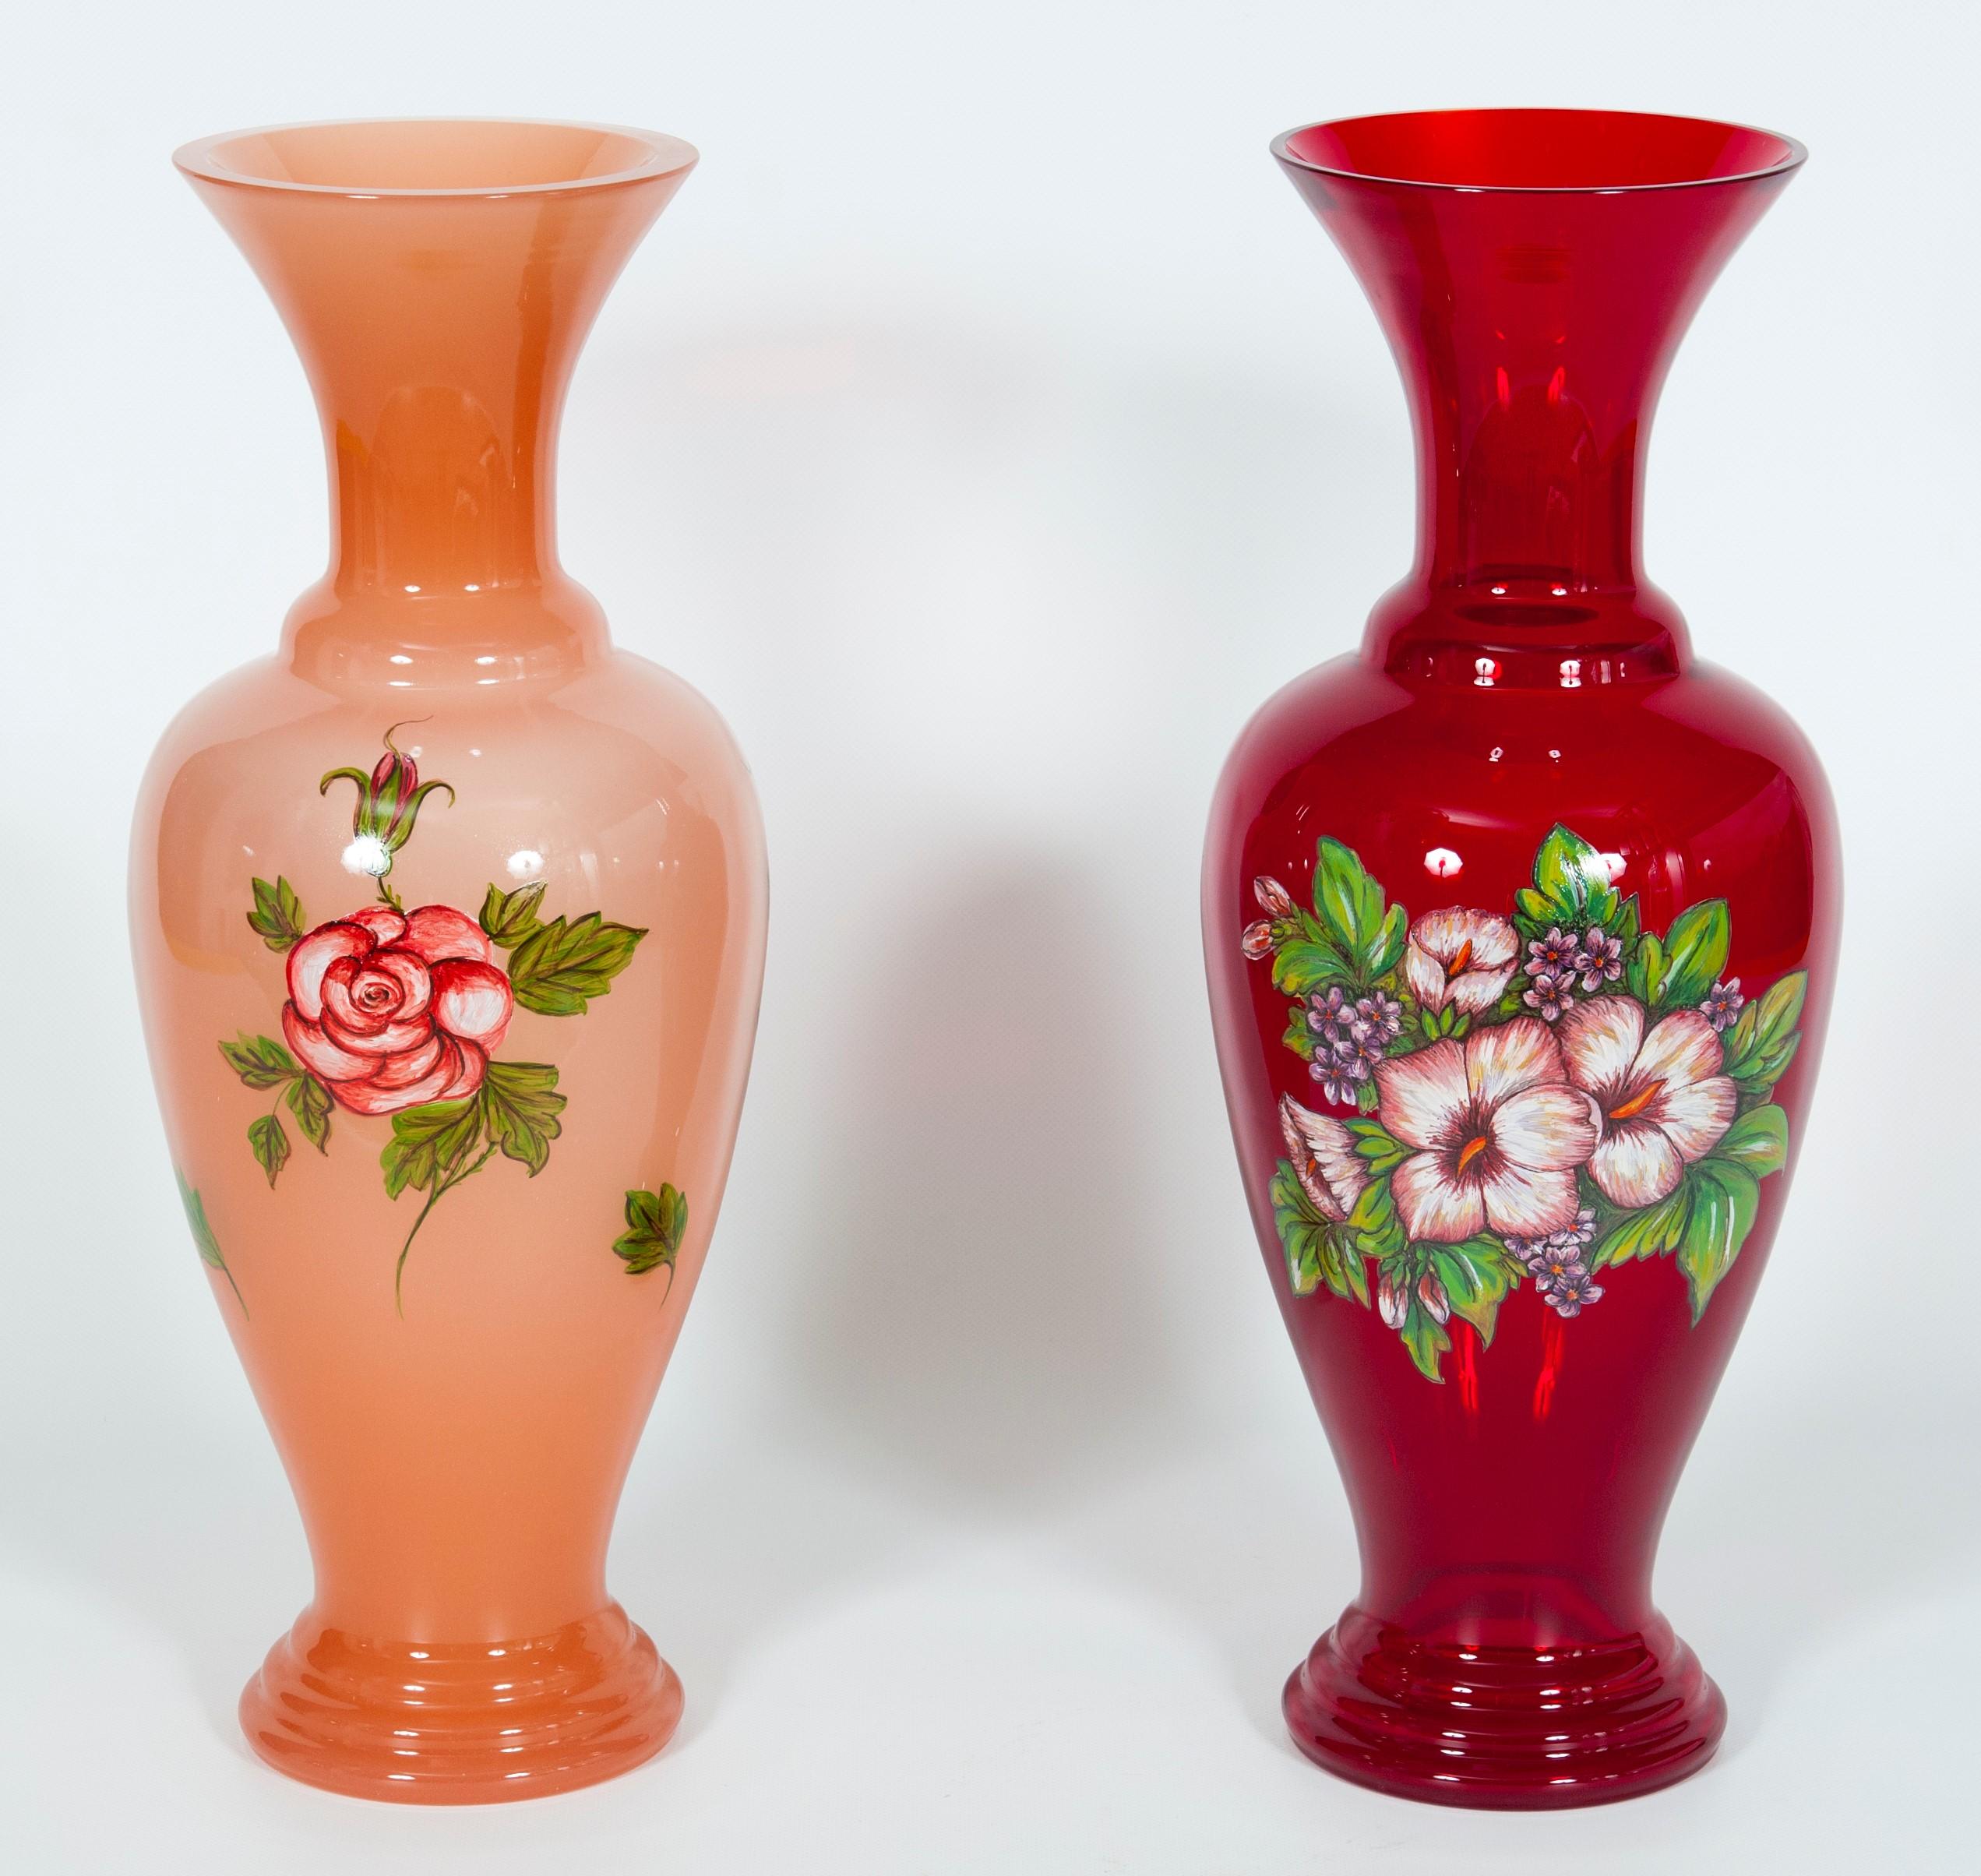 Pair of pink and red Murano glass floral vases art painting, 1990s, Italy.
These outstanding pair of glass vases were entirely handcrafted in the Italian island of Murano in the 1990s, utilizing the local glassmaking techniques that are worldwide